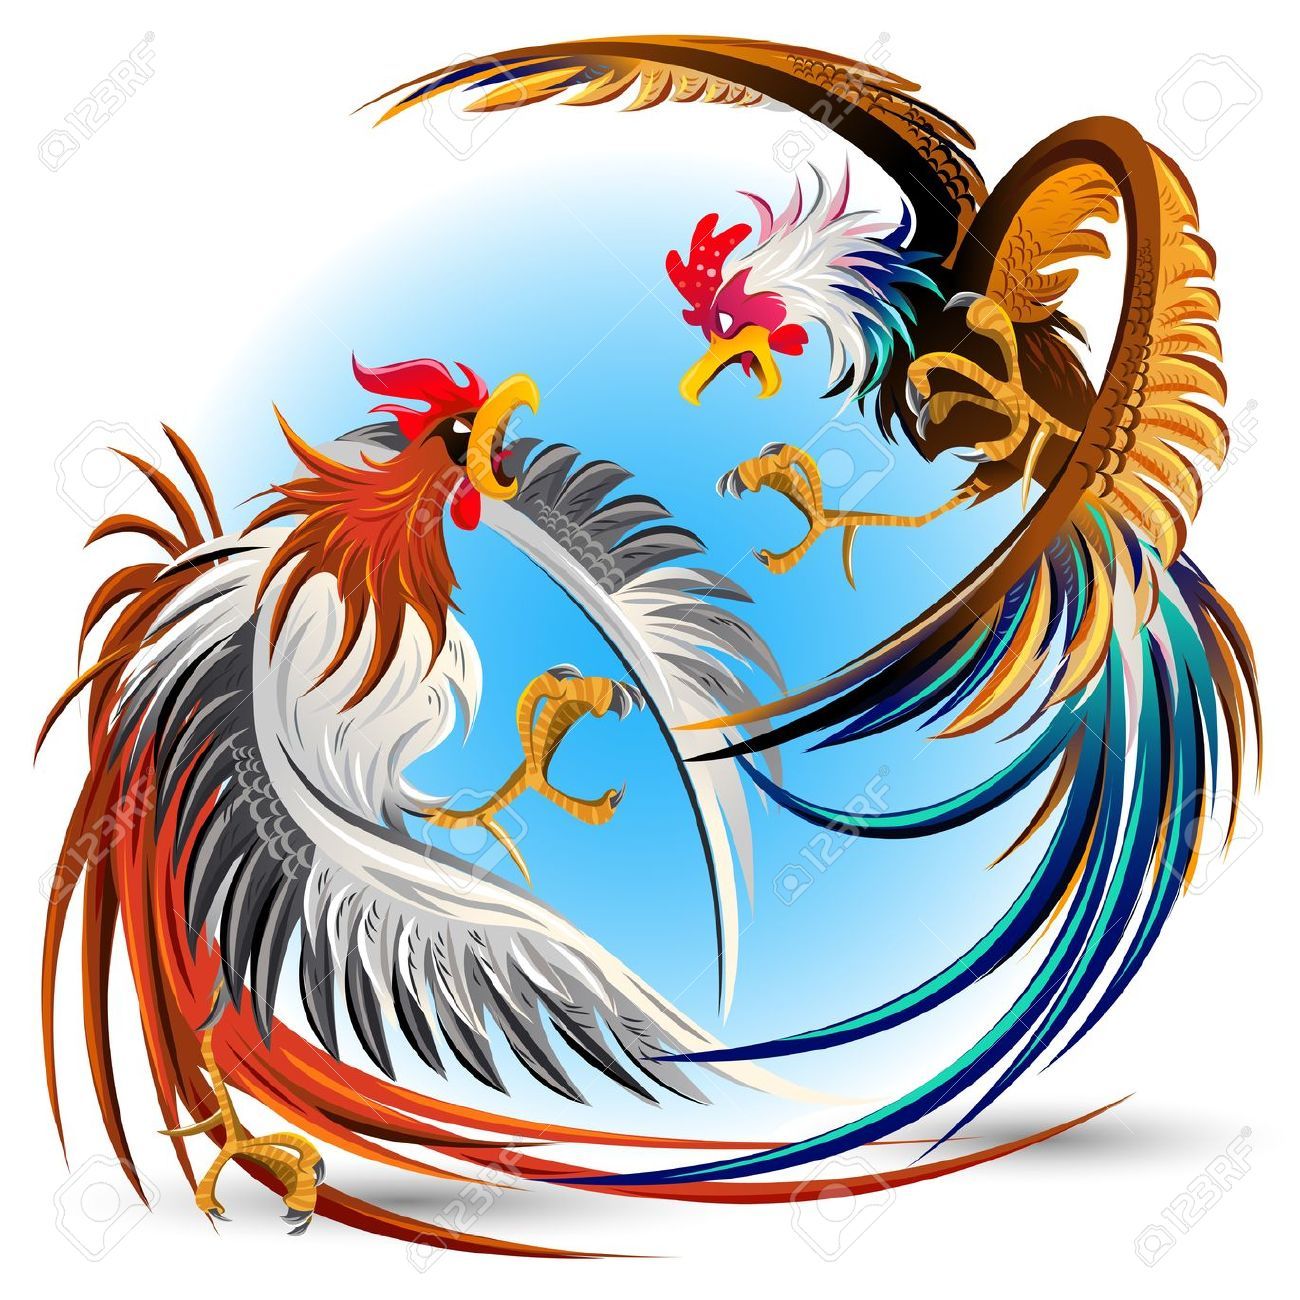 Rooster Fight Stock Vector Illustration And Royalty Free Rooster.